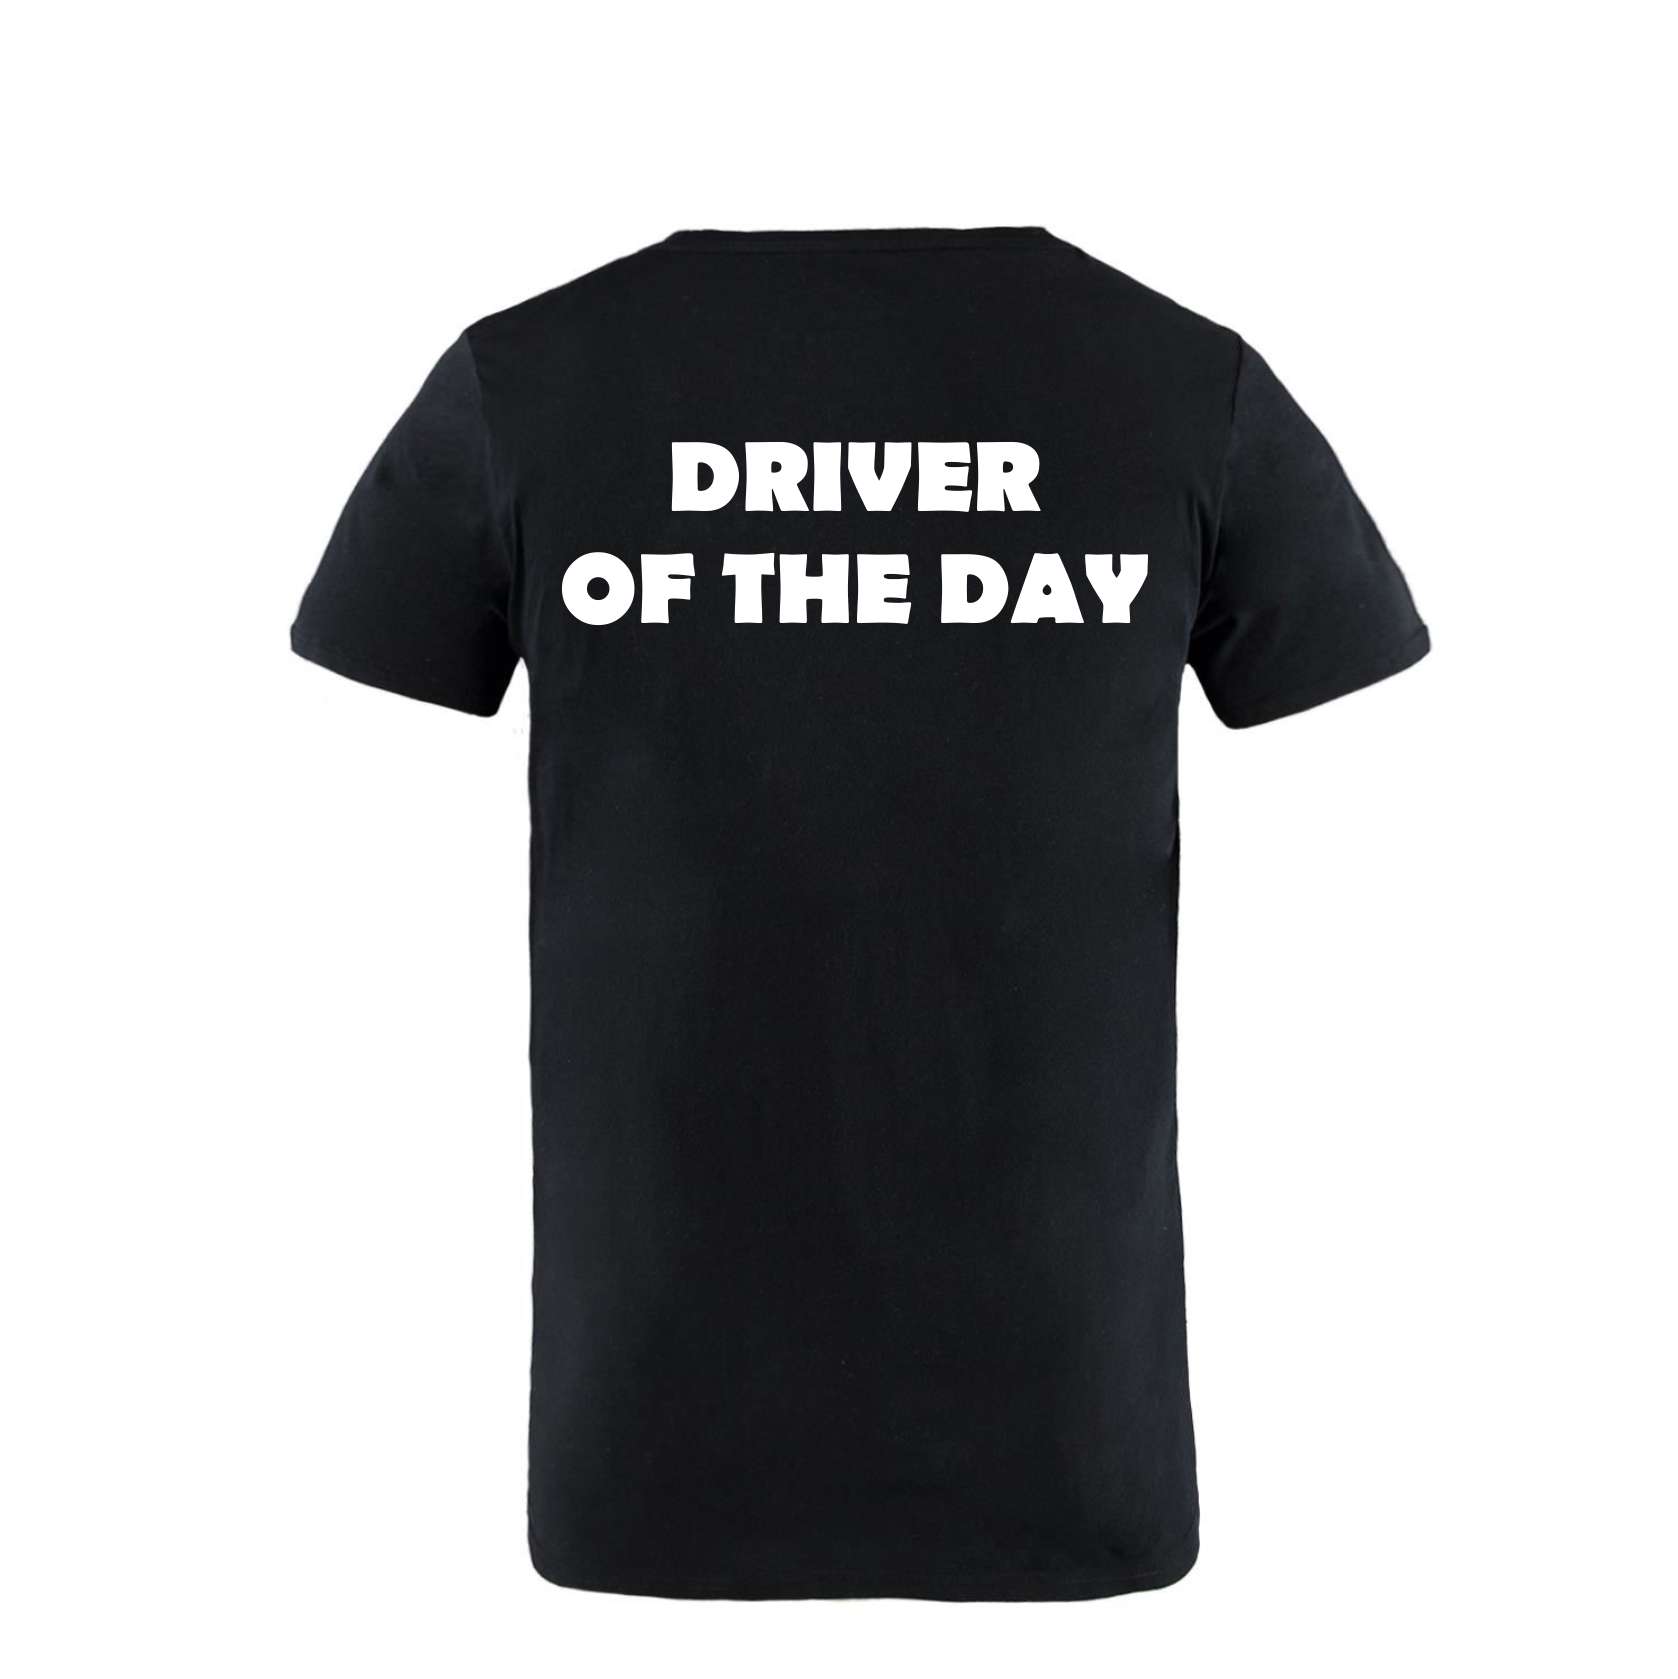 Driver of the day